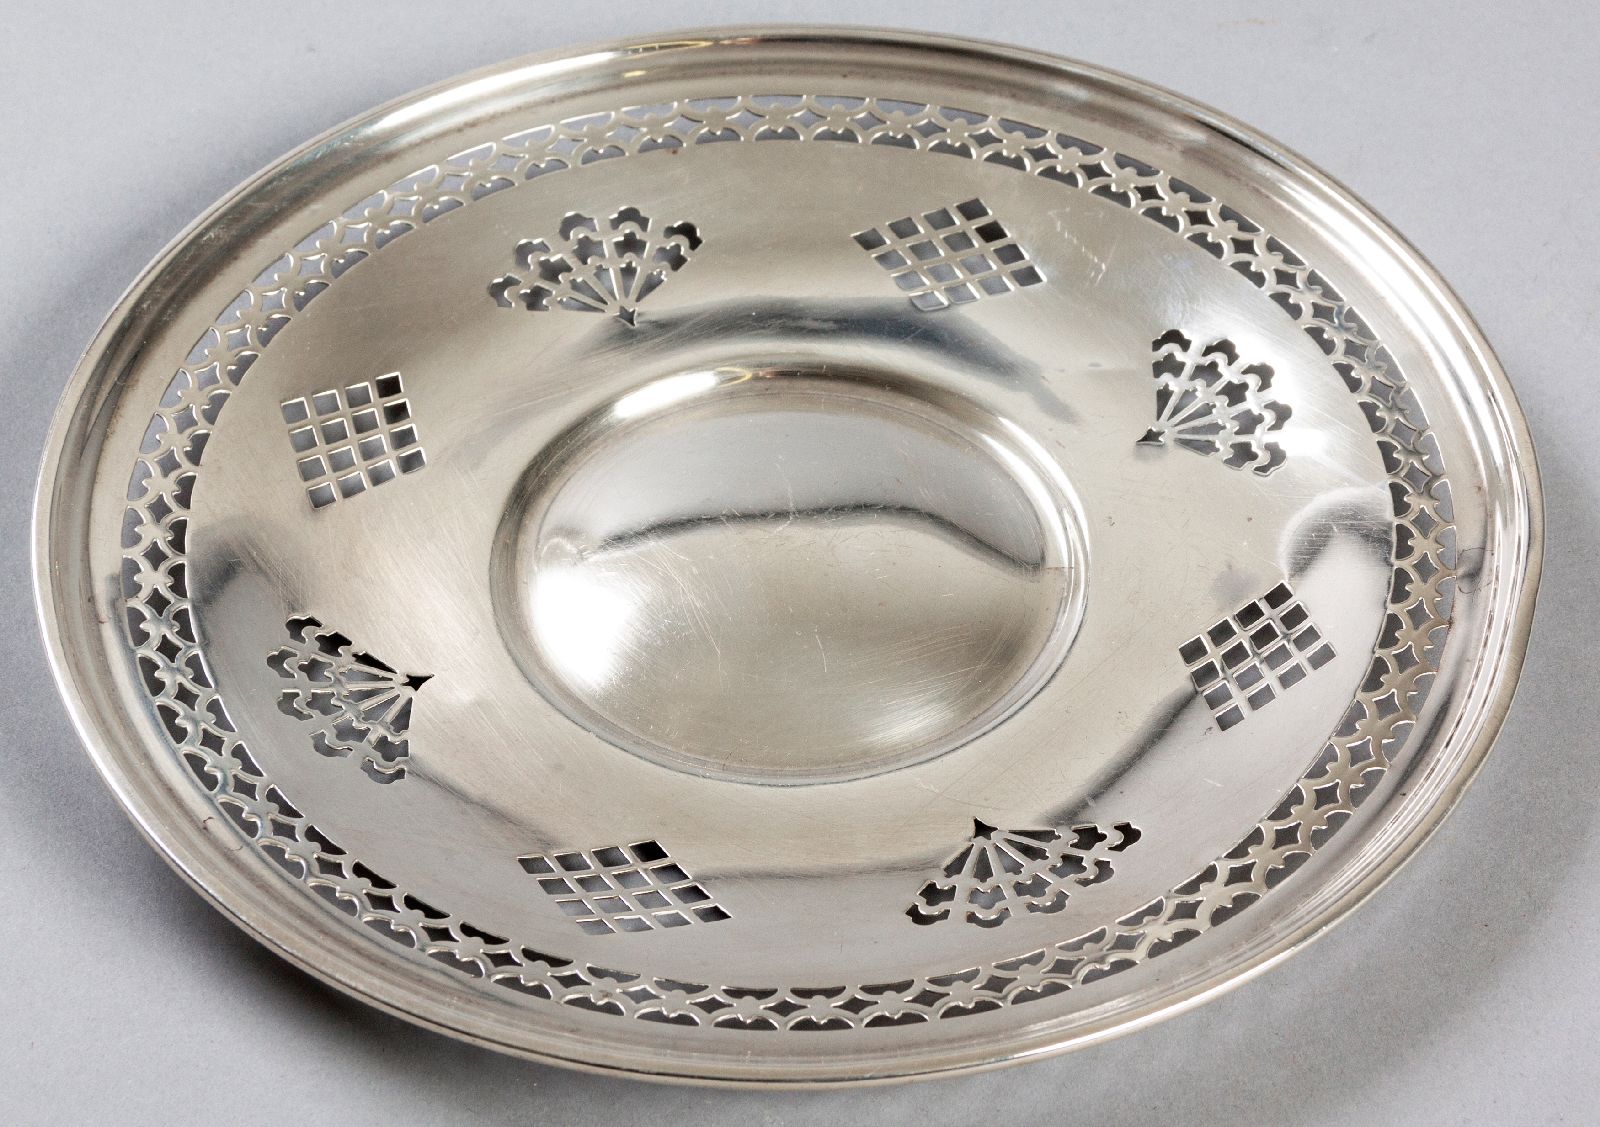 AN EDWARDIAN SILVER SALVER, SHEFFIELD 1901, MAPPIN & WEBB, of circular-form with a fold-over rim,